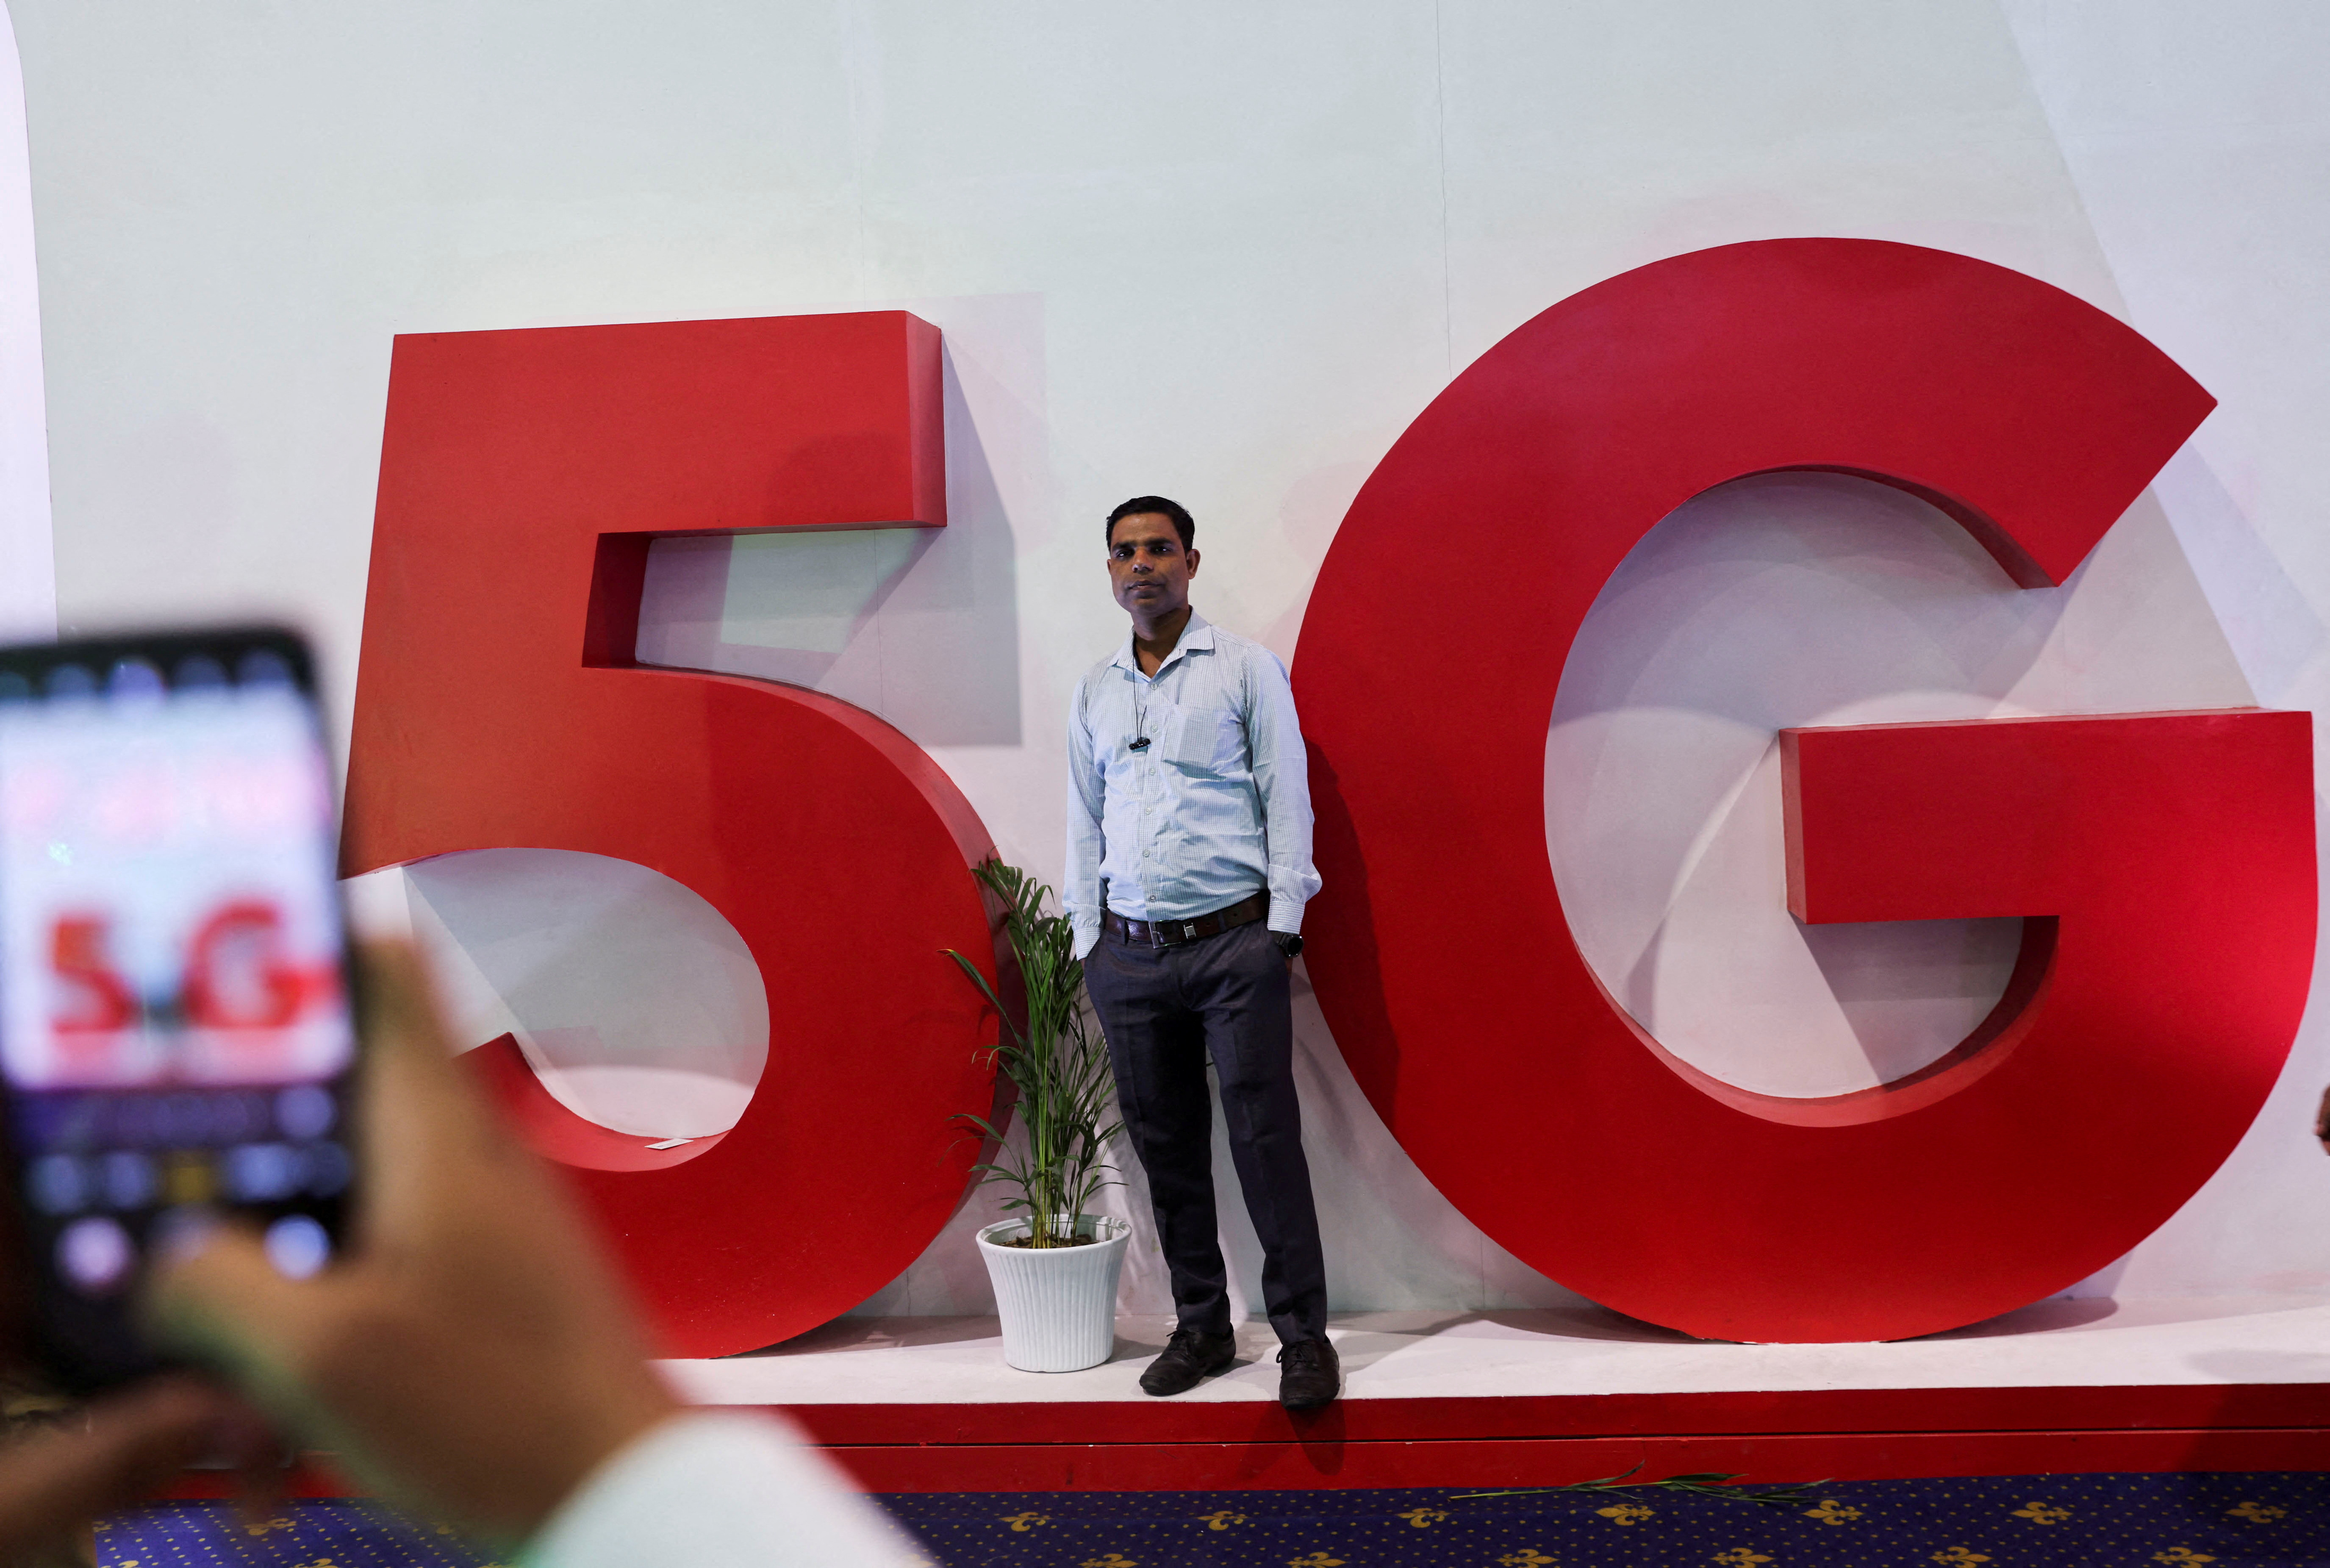 A man takes a picture of a friend in front of a sign showing installation of the 5G network